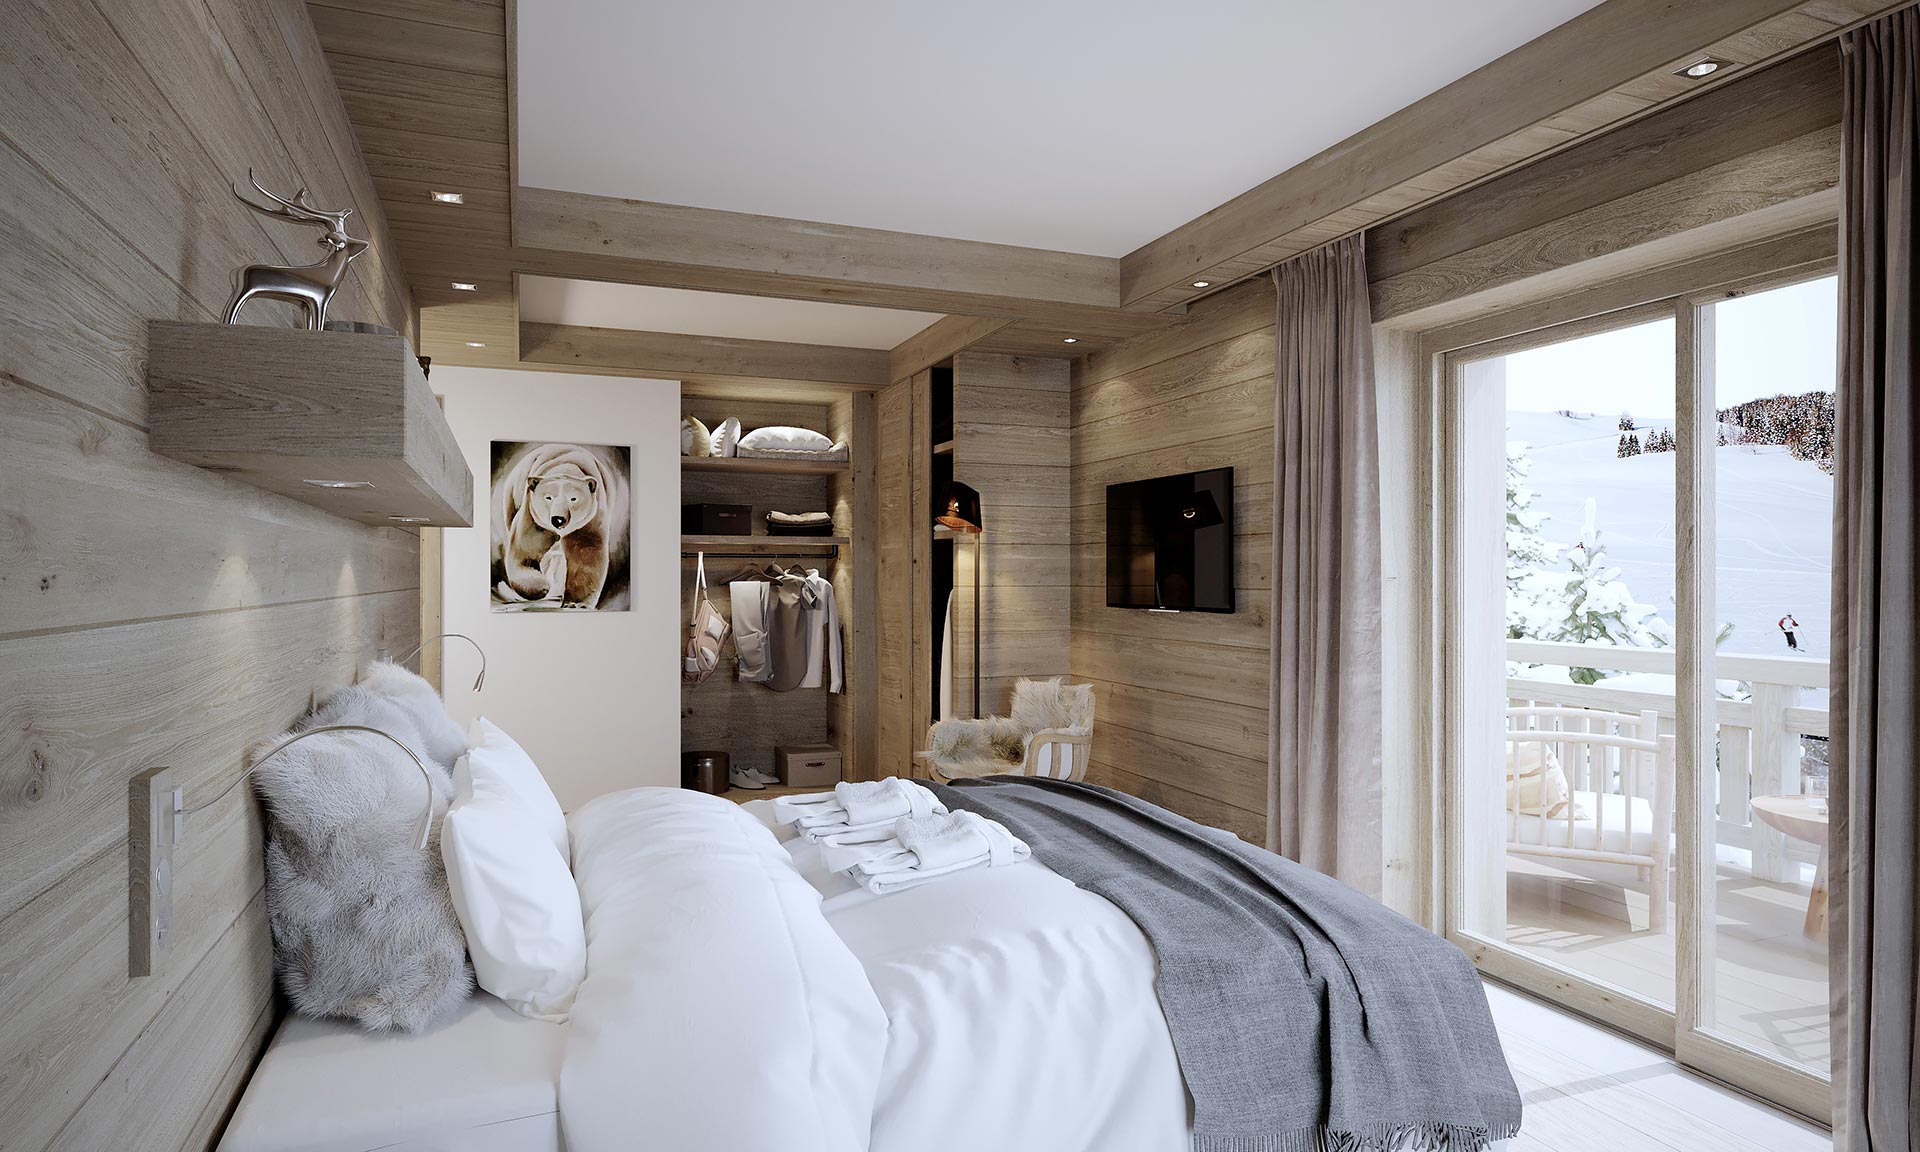 3D photo - Bedroom perspective for a luxury chalet project in Chamonix